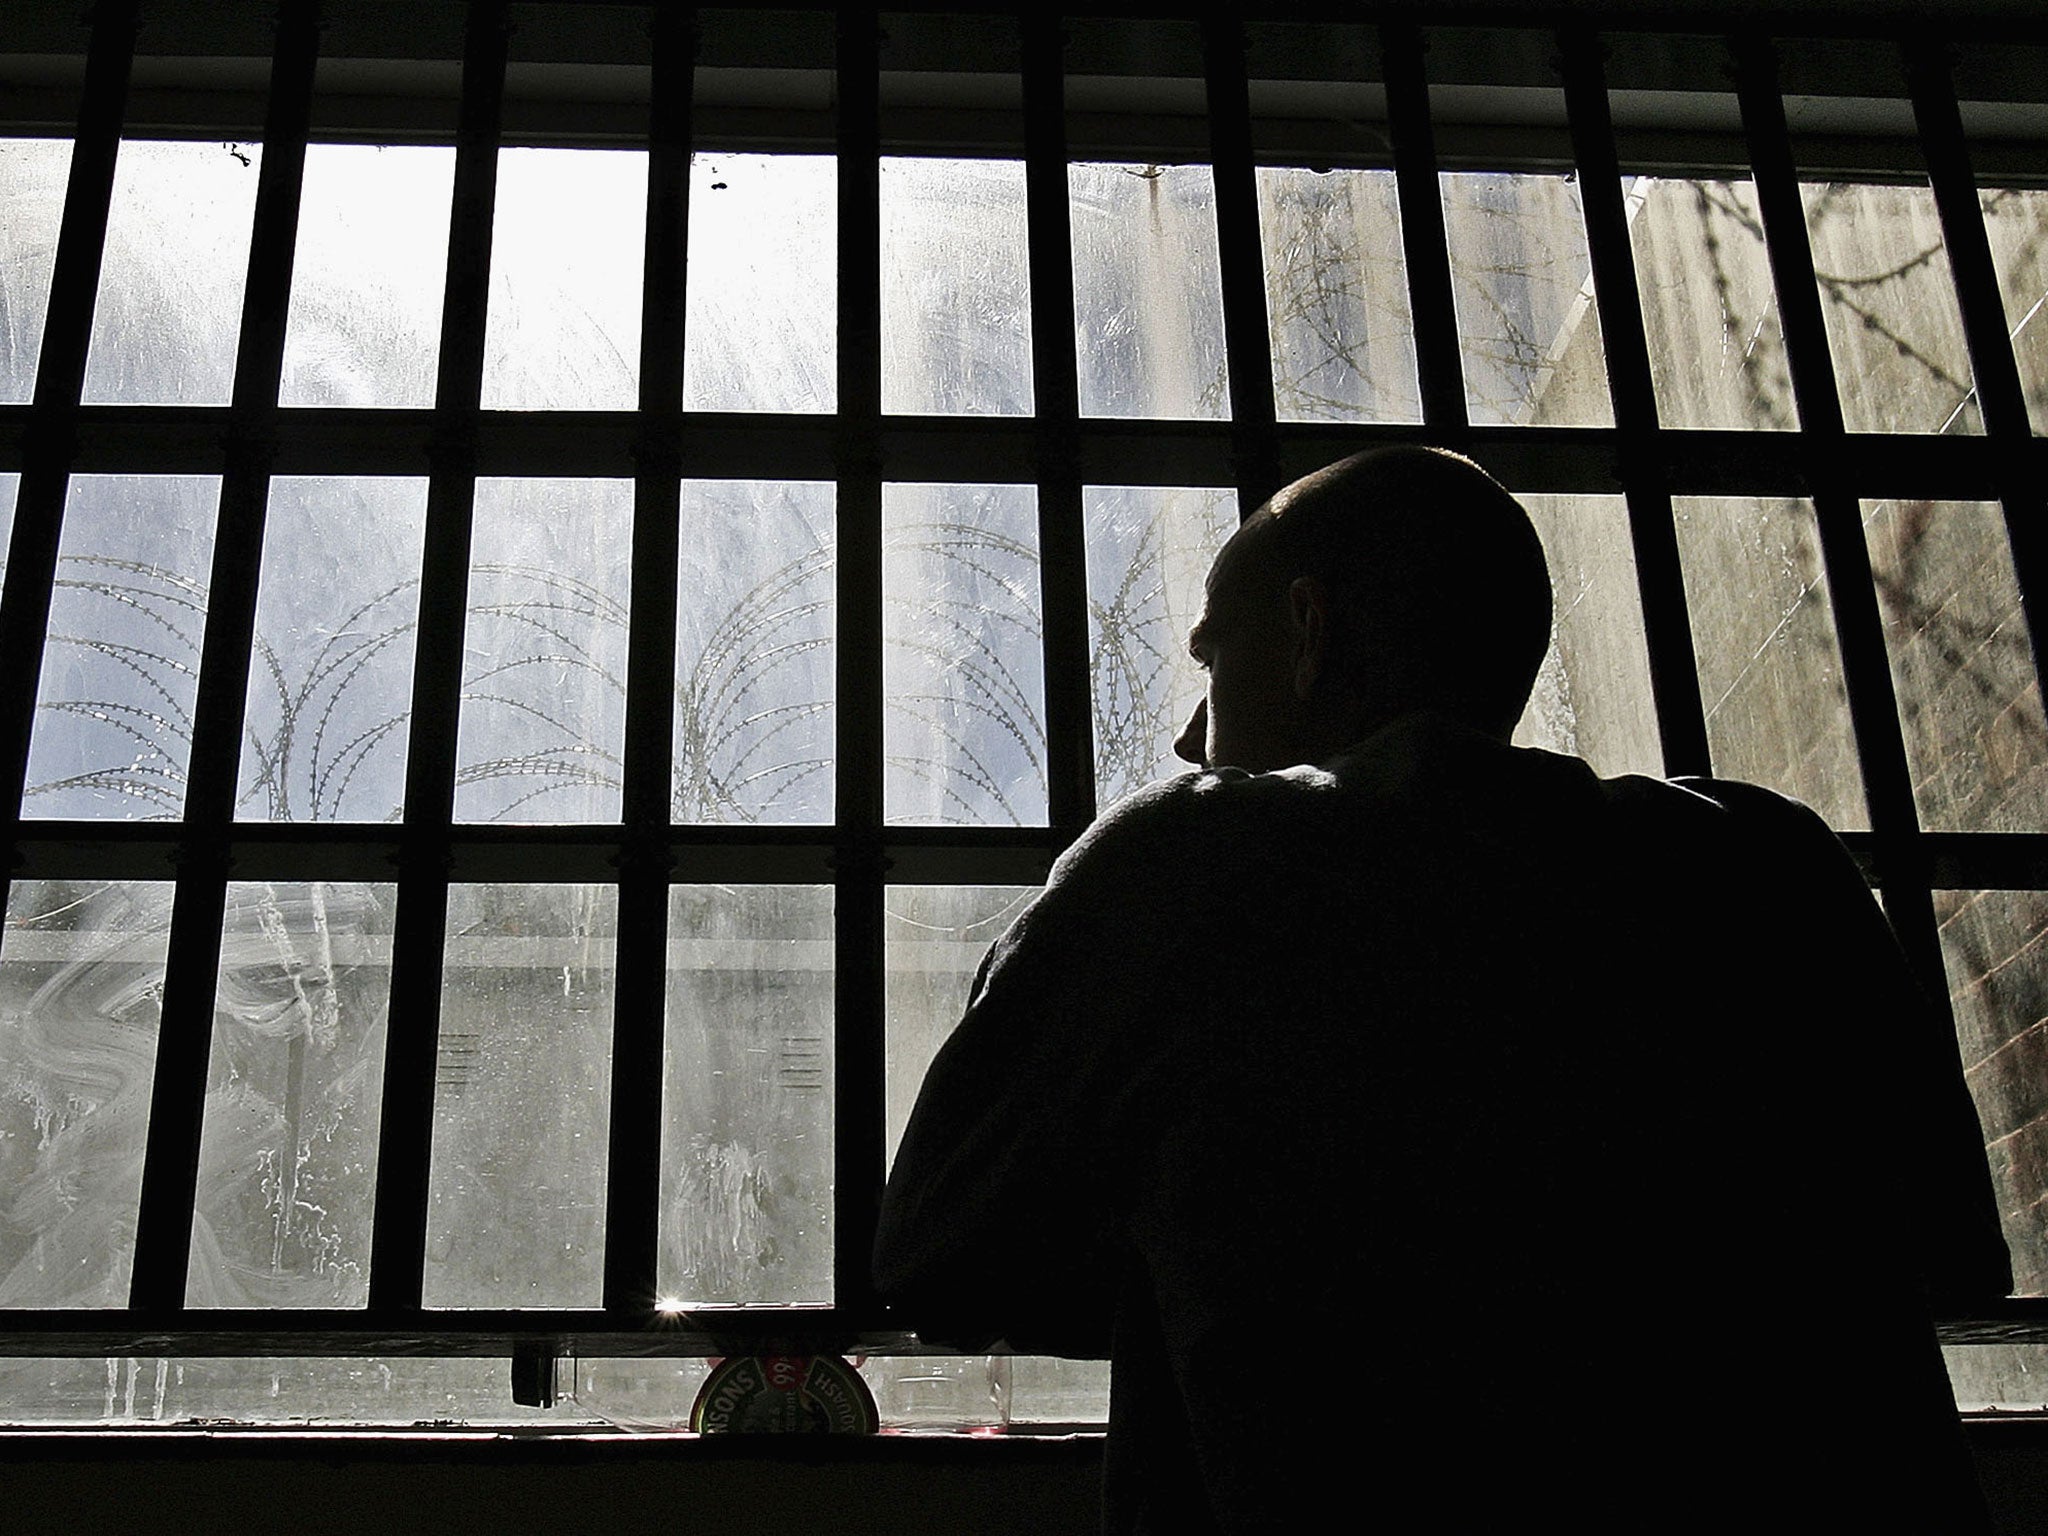 The Institute for Public Policy Research (IPPR) has suggested that the cost of jailing petty criminals should be charged to their home towns to help reduce the growing prison population